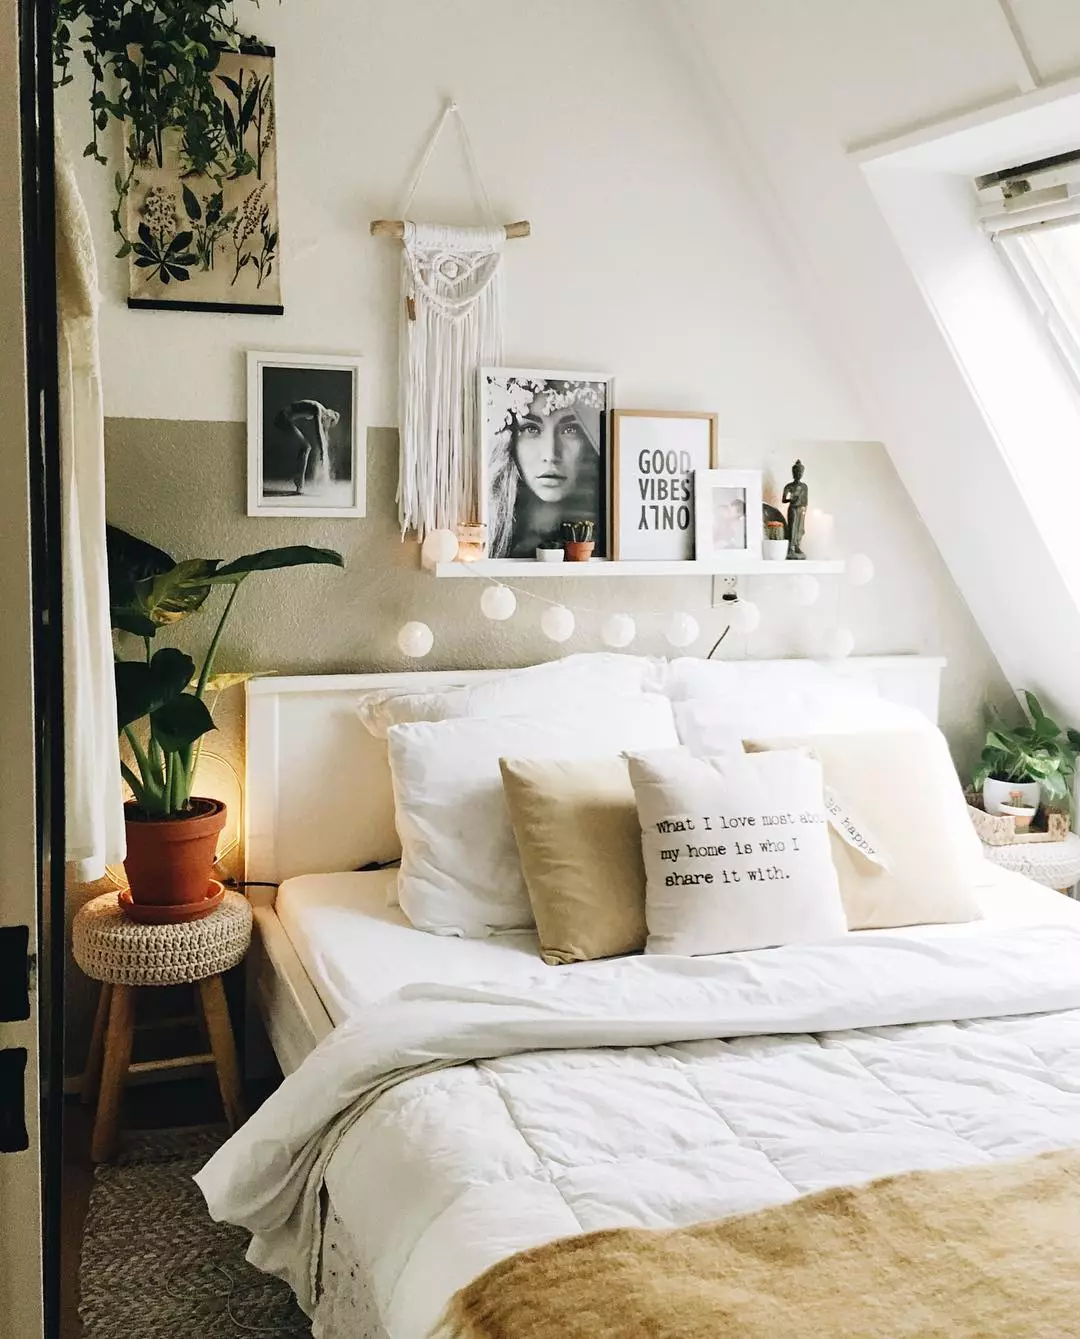 18 Small Bedroom Ideas How to Make Your Room Look Bigger ...